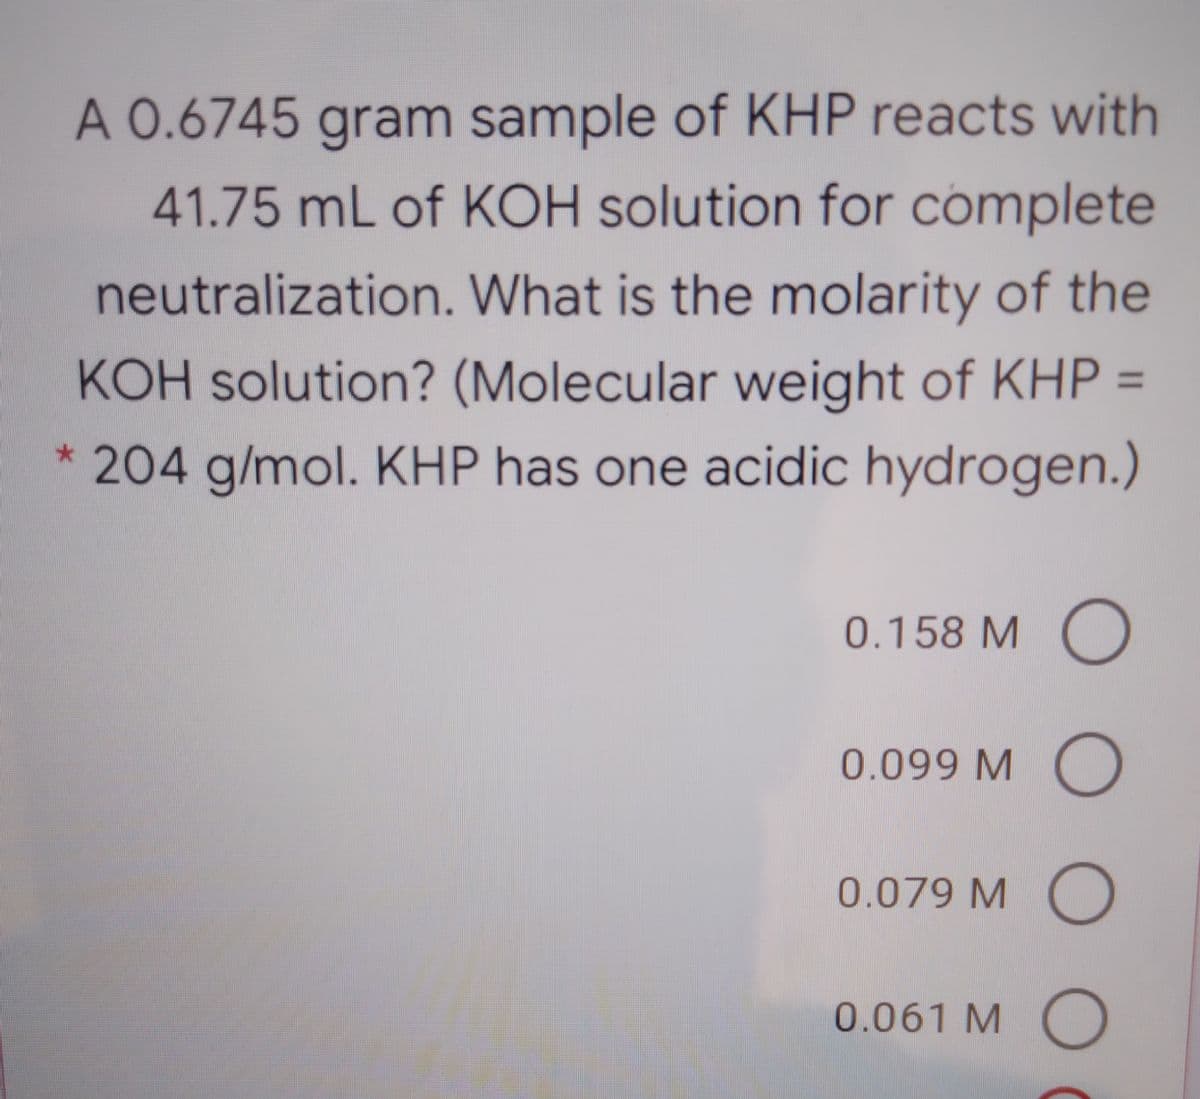 A 0.6745 gram sample of KHP reacts with
41.75 mL of KOH solution for complete
neutralization. What is the molarity of the
KOH solution? (Molecular weight of KHP =
204 g/mol. KHP has one acidic hydrogen.)
0.158 M()
0.099 M O
0.079 M )
0.061 MO
